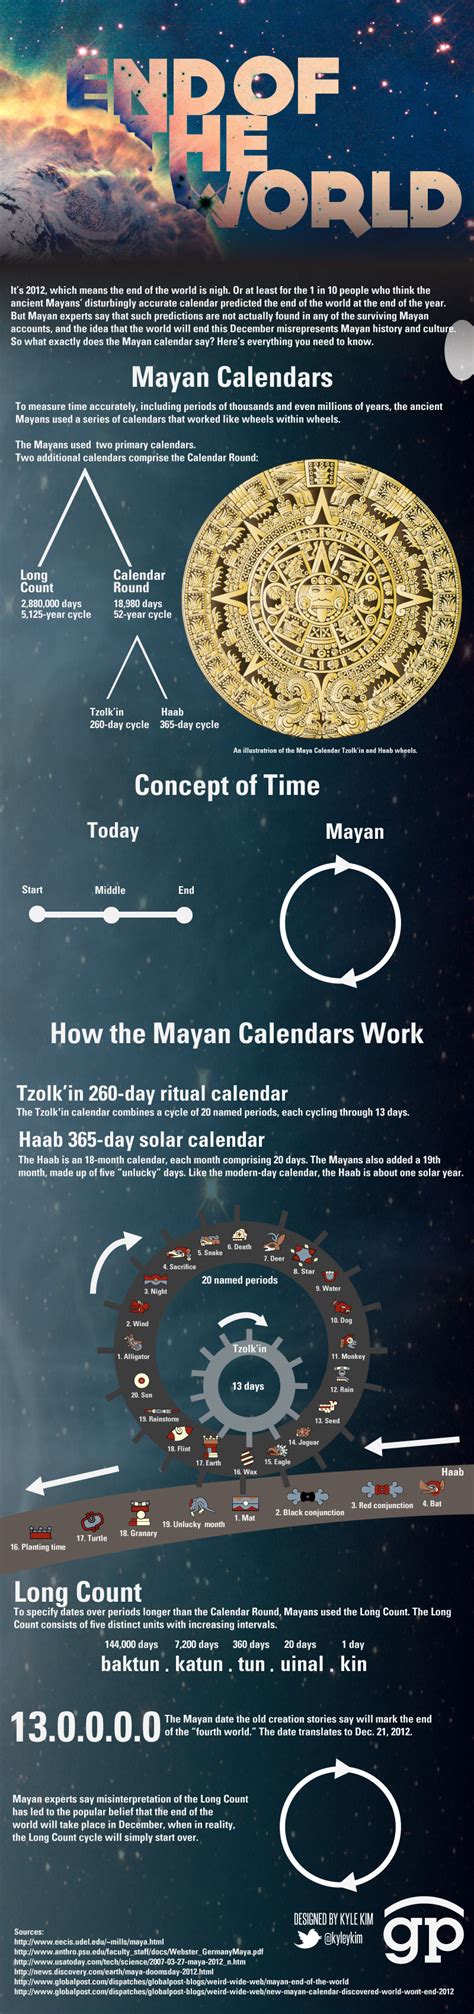 Mayan Calendars Will December 21 2012 Be The End Of The